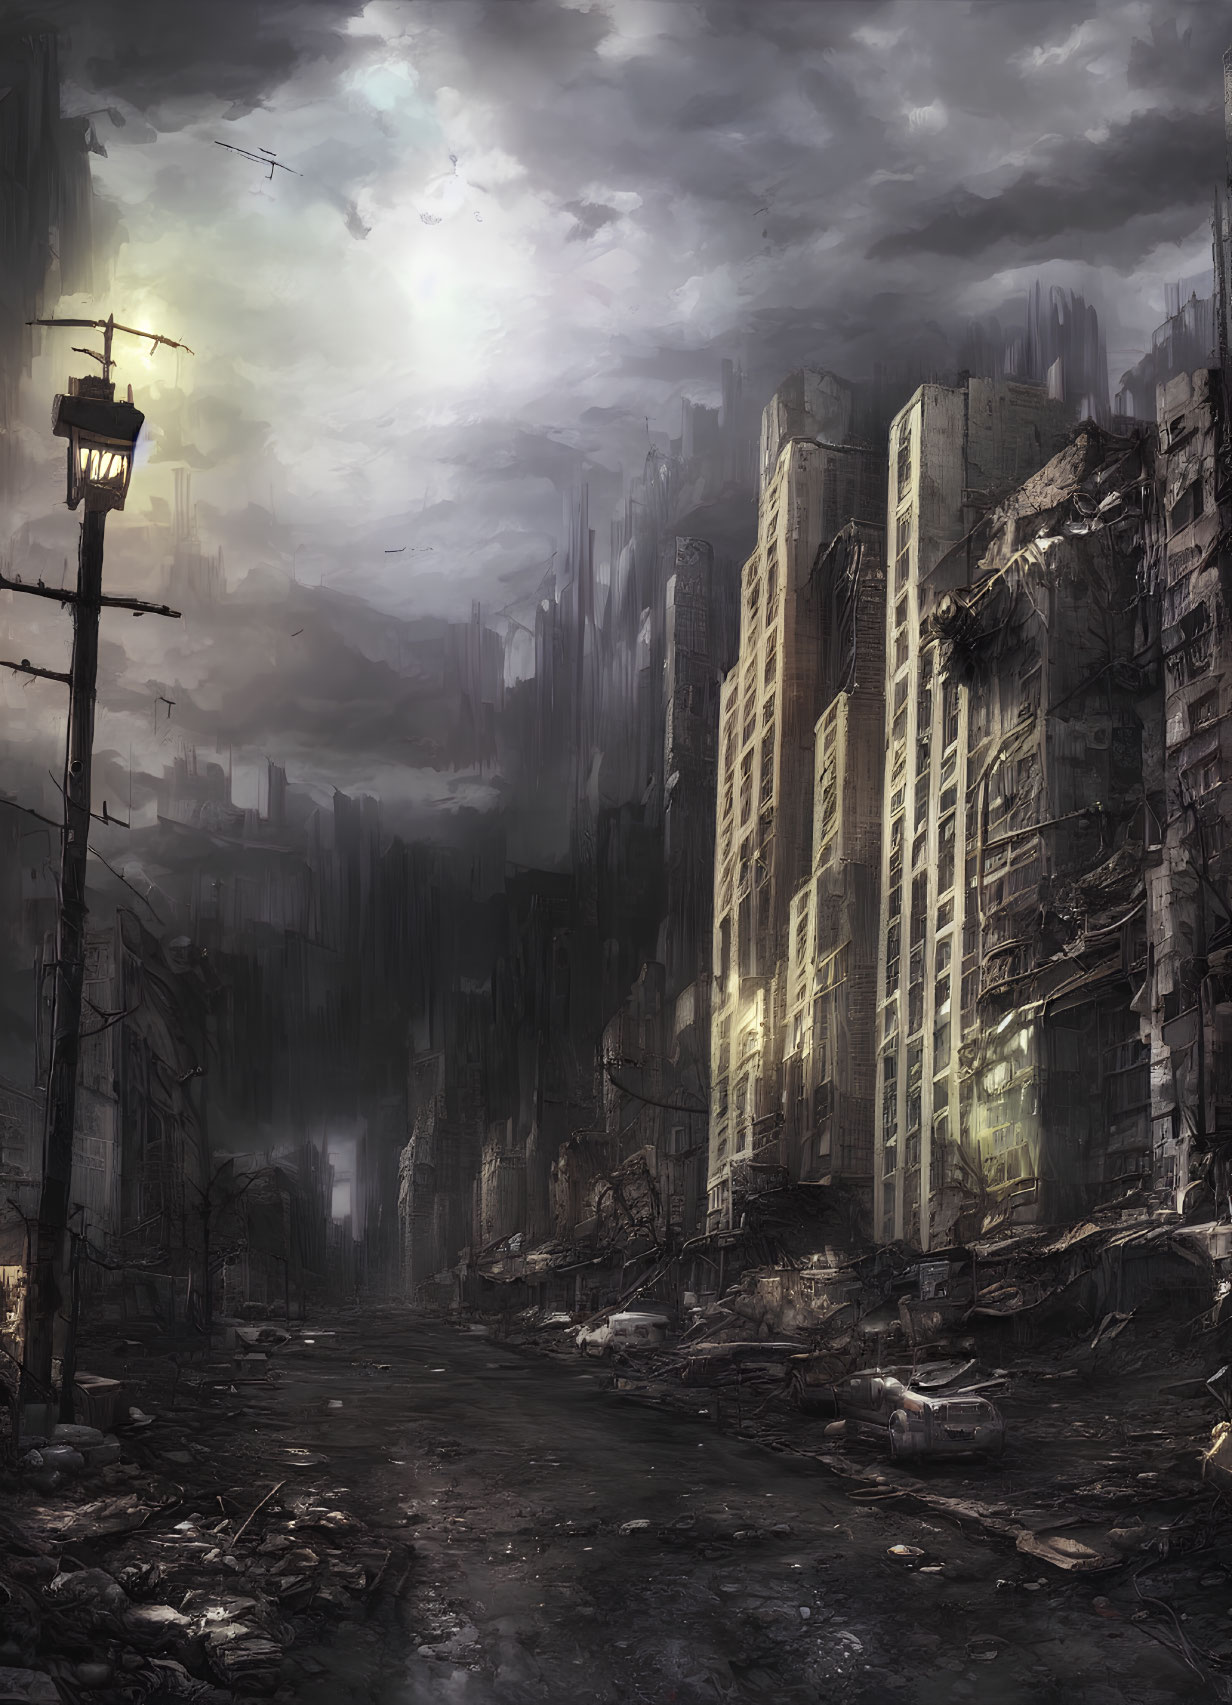 Desolate post-apocalyptic cityscape with dimly lit streetlamp